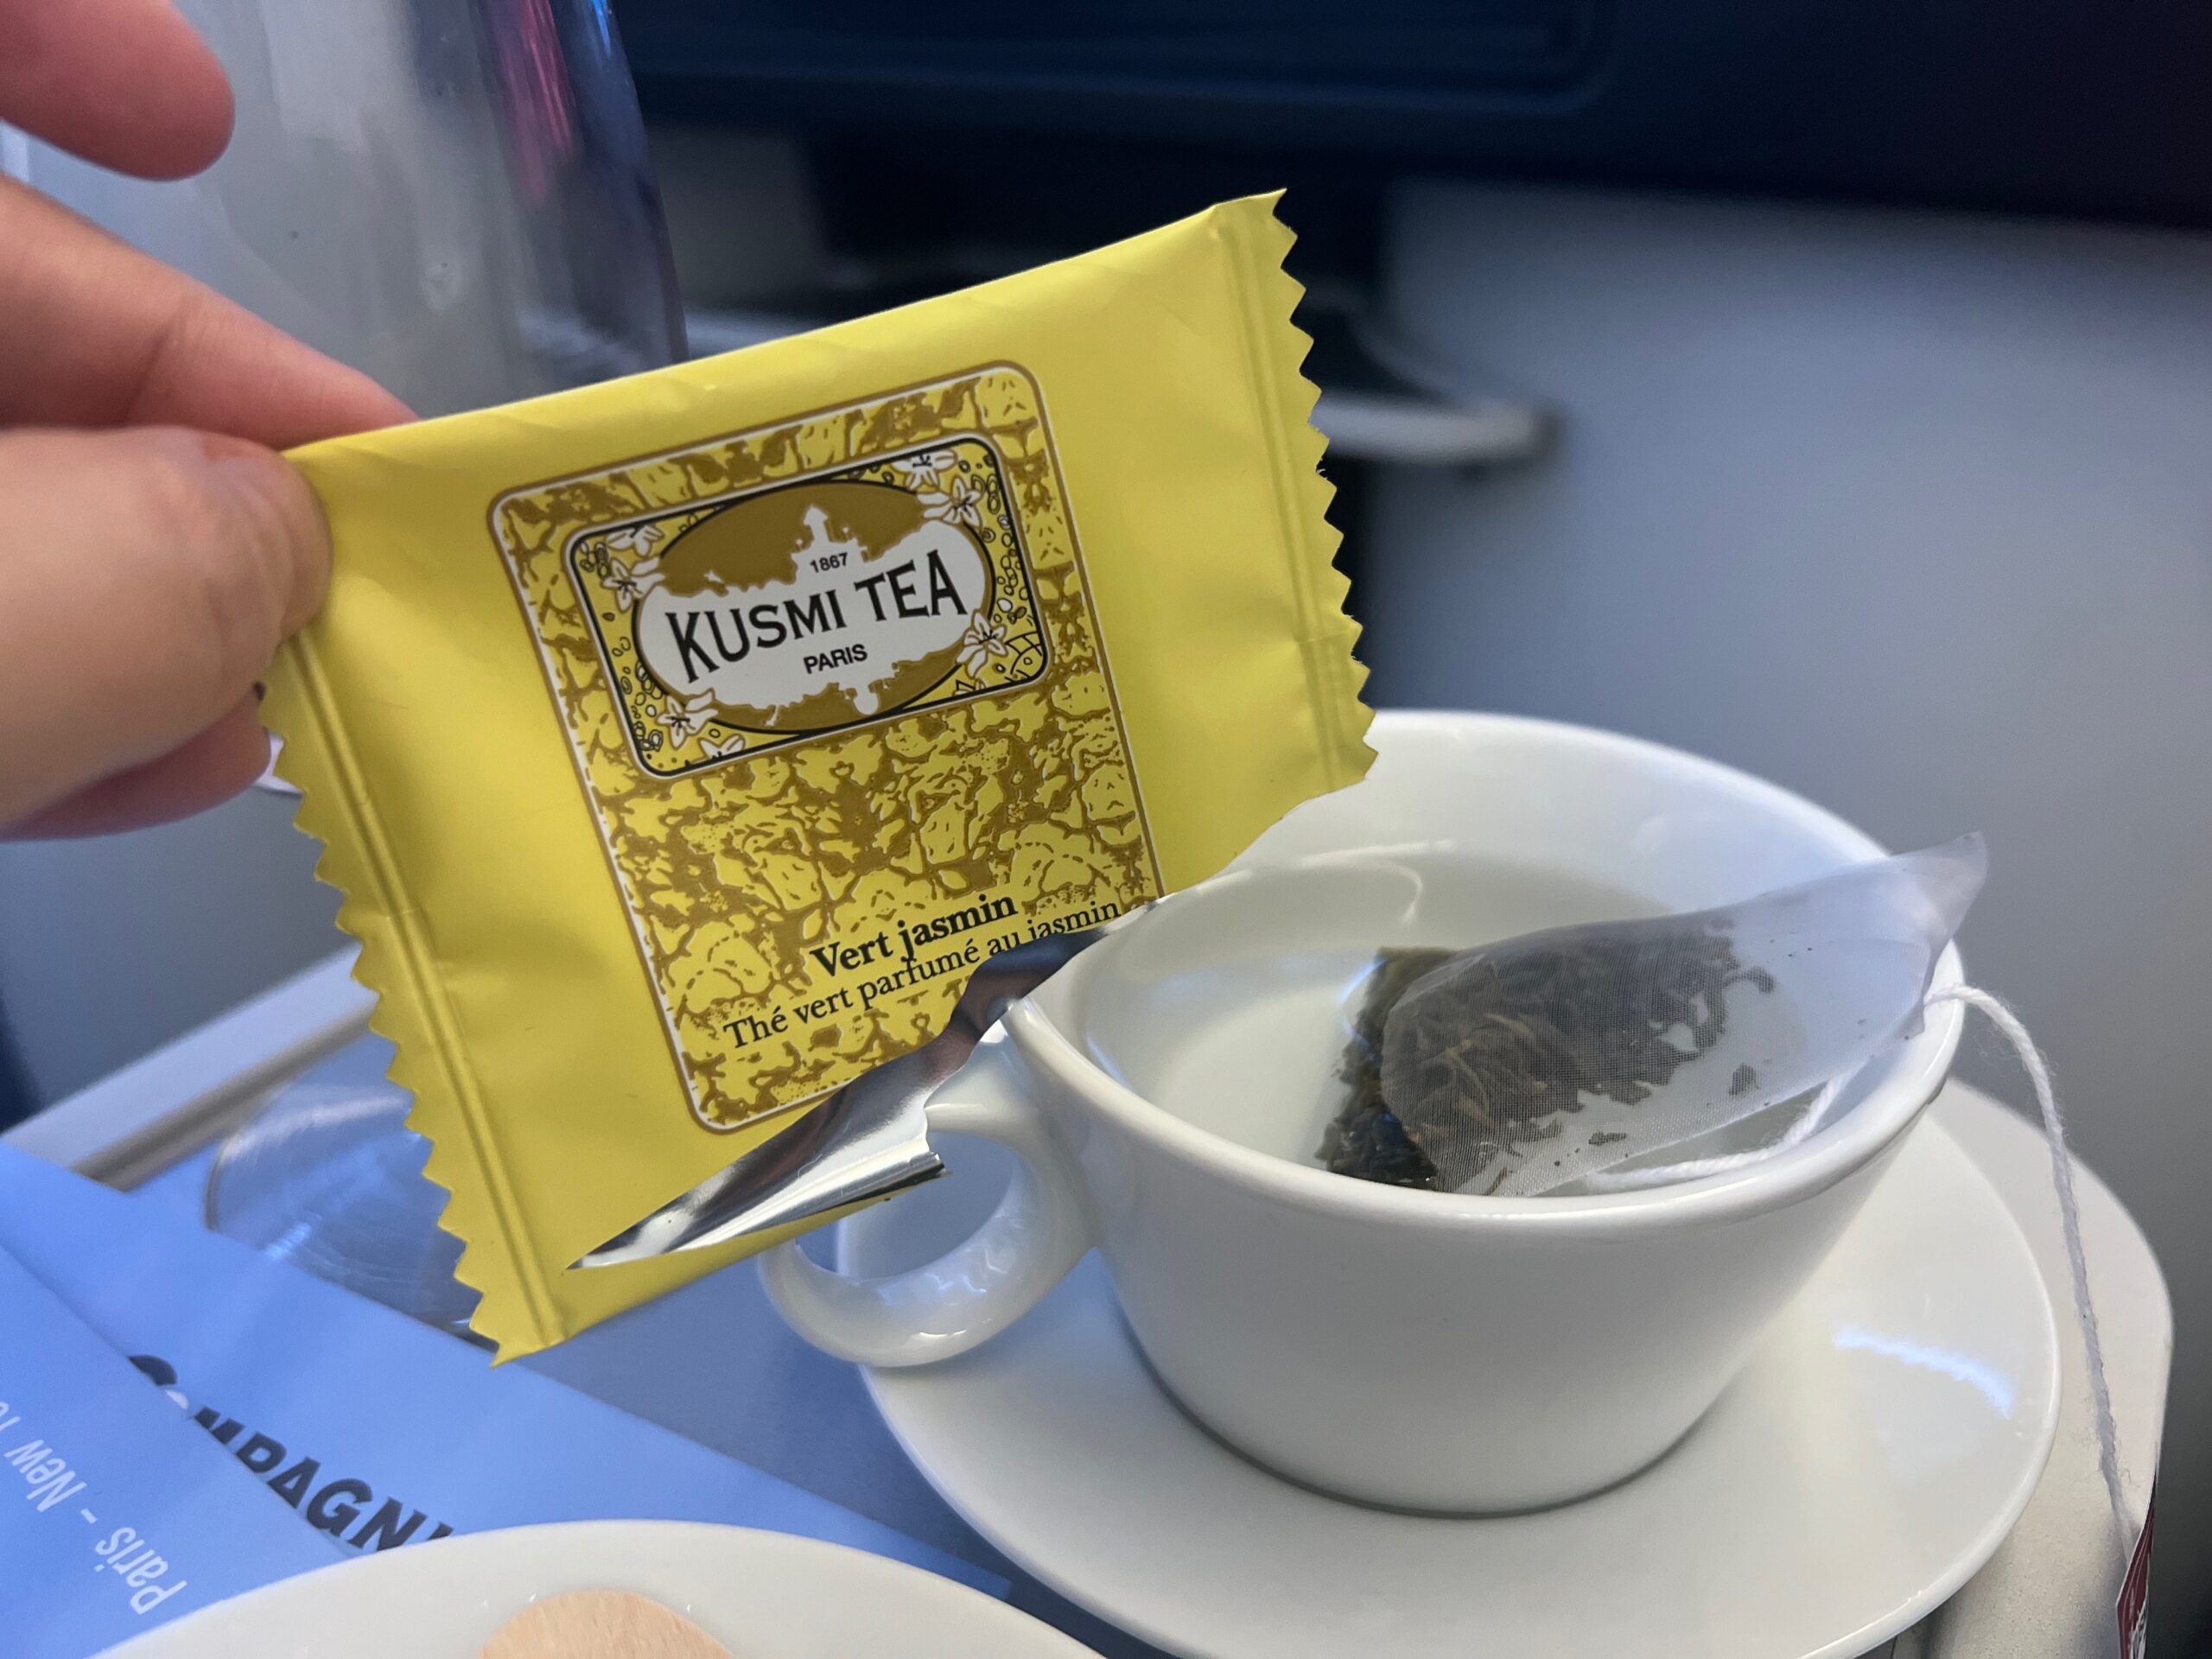 Flying on La Compagnie all-business class airline from Paris to New York &mdash; the tea.